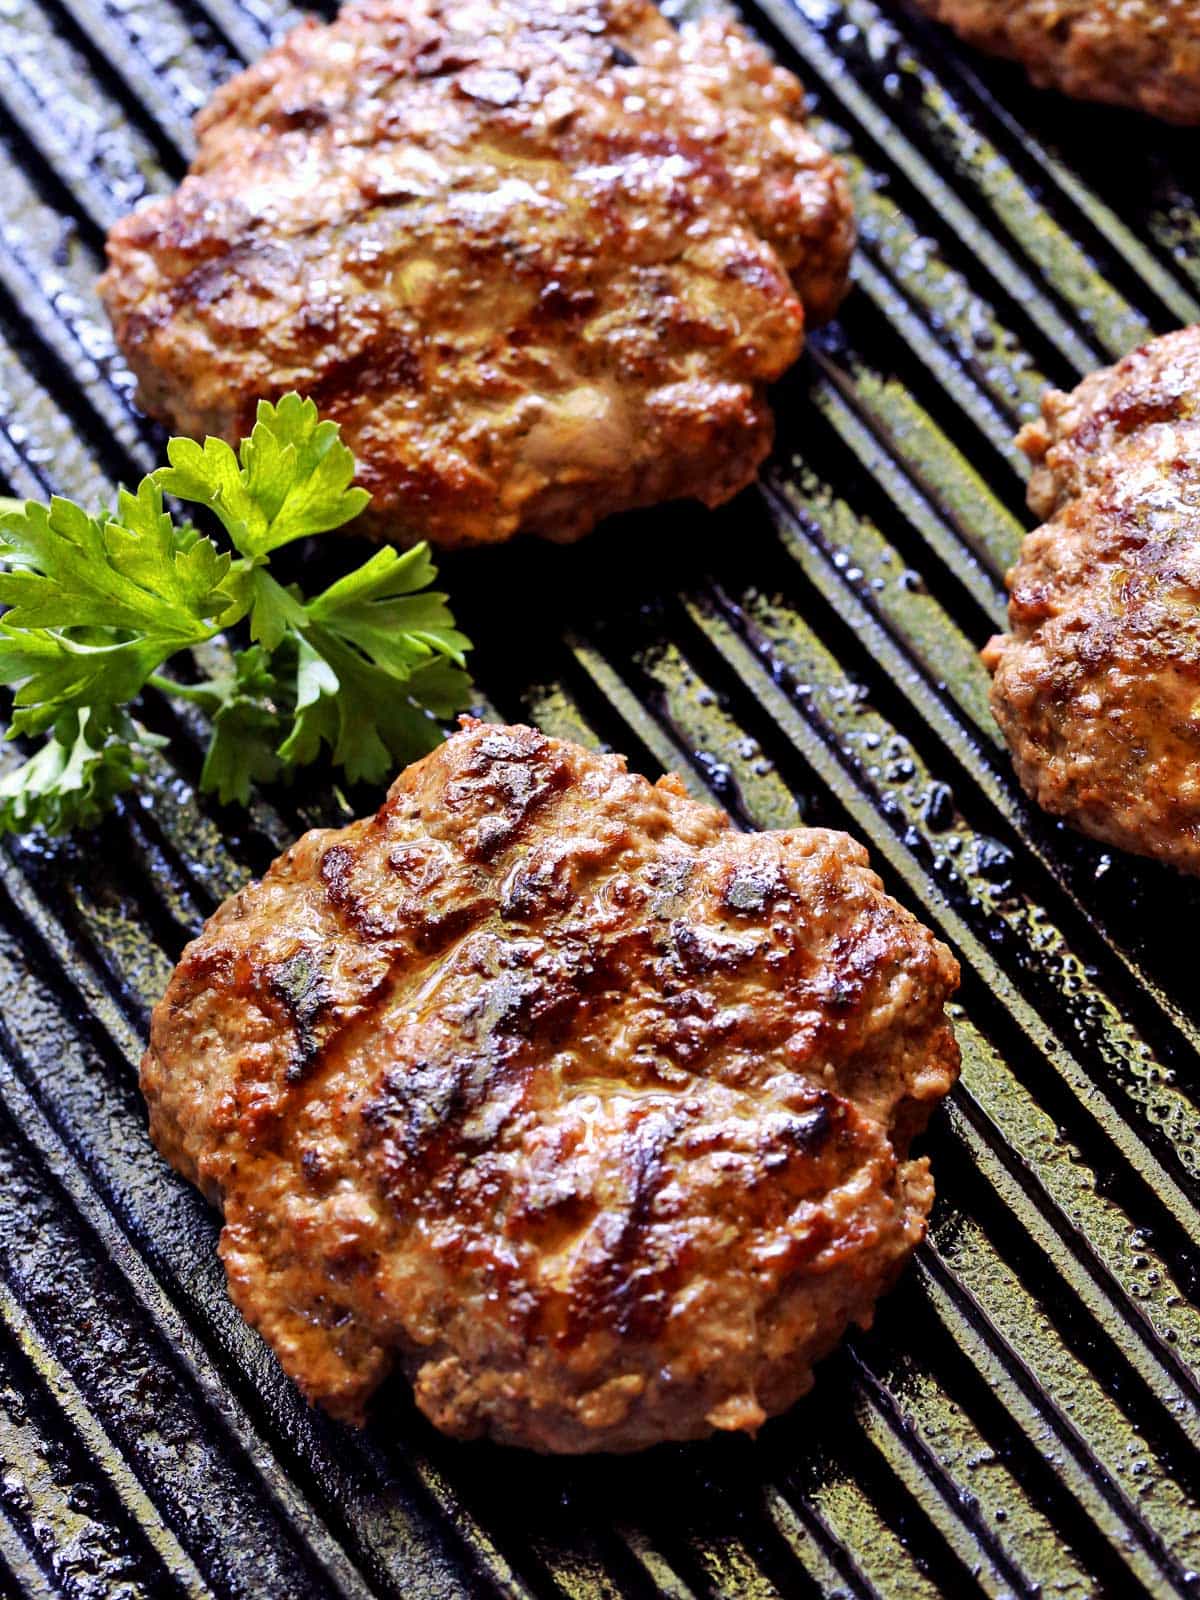 Grilled hamburgers photographed on the grill. 